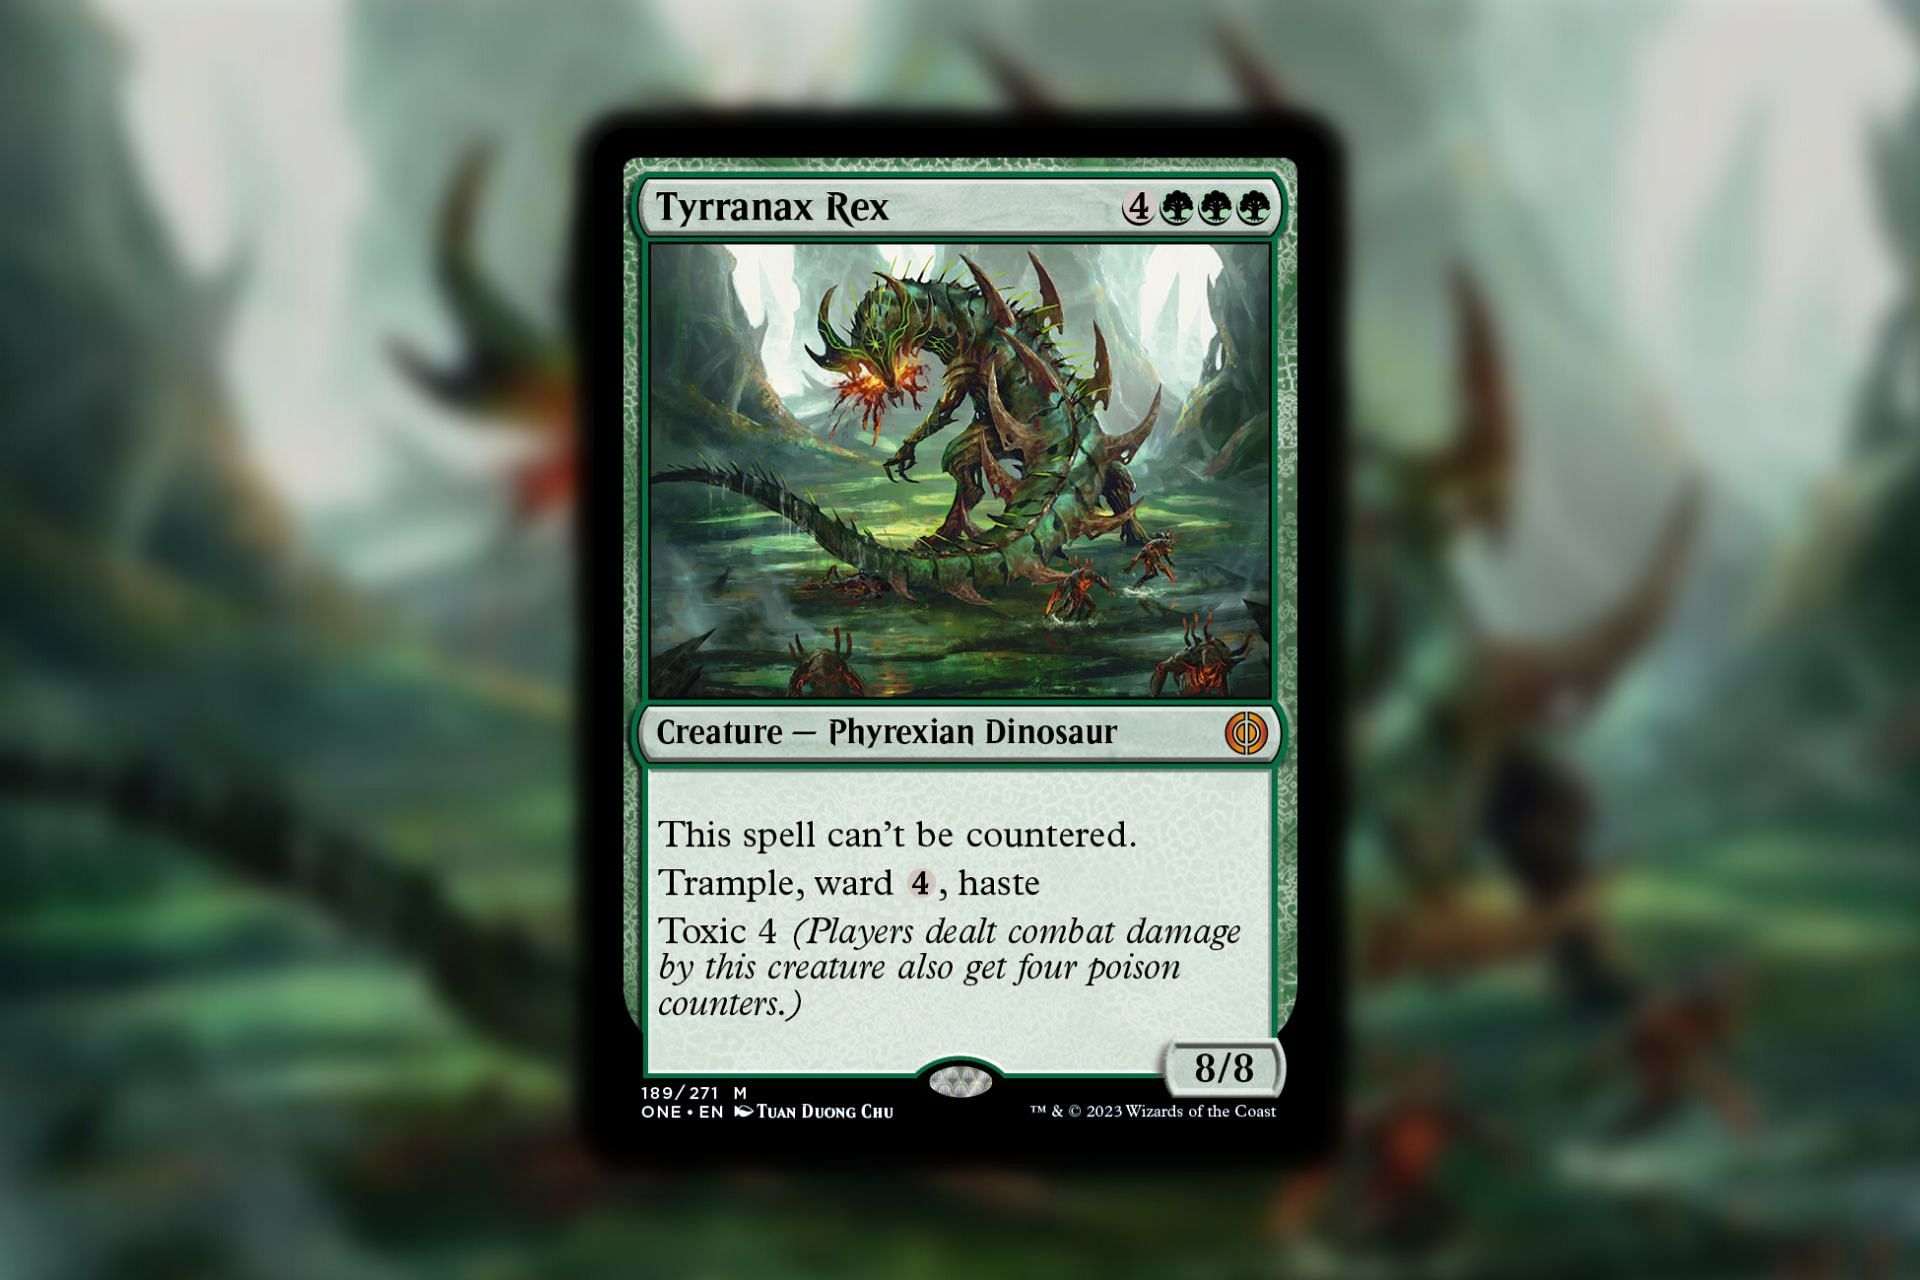 Tyrranax Rex is going to be one of the best green cards in the next Magic: The Gathering expansion.